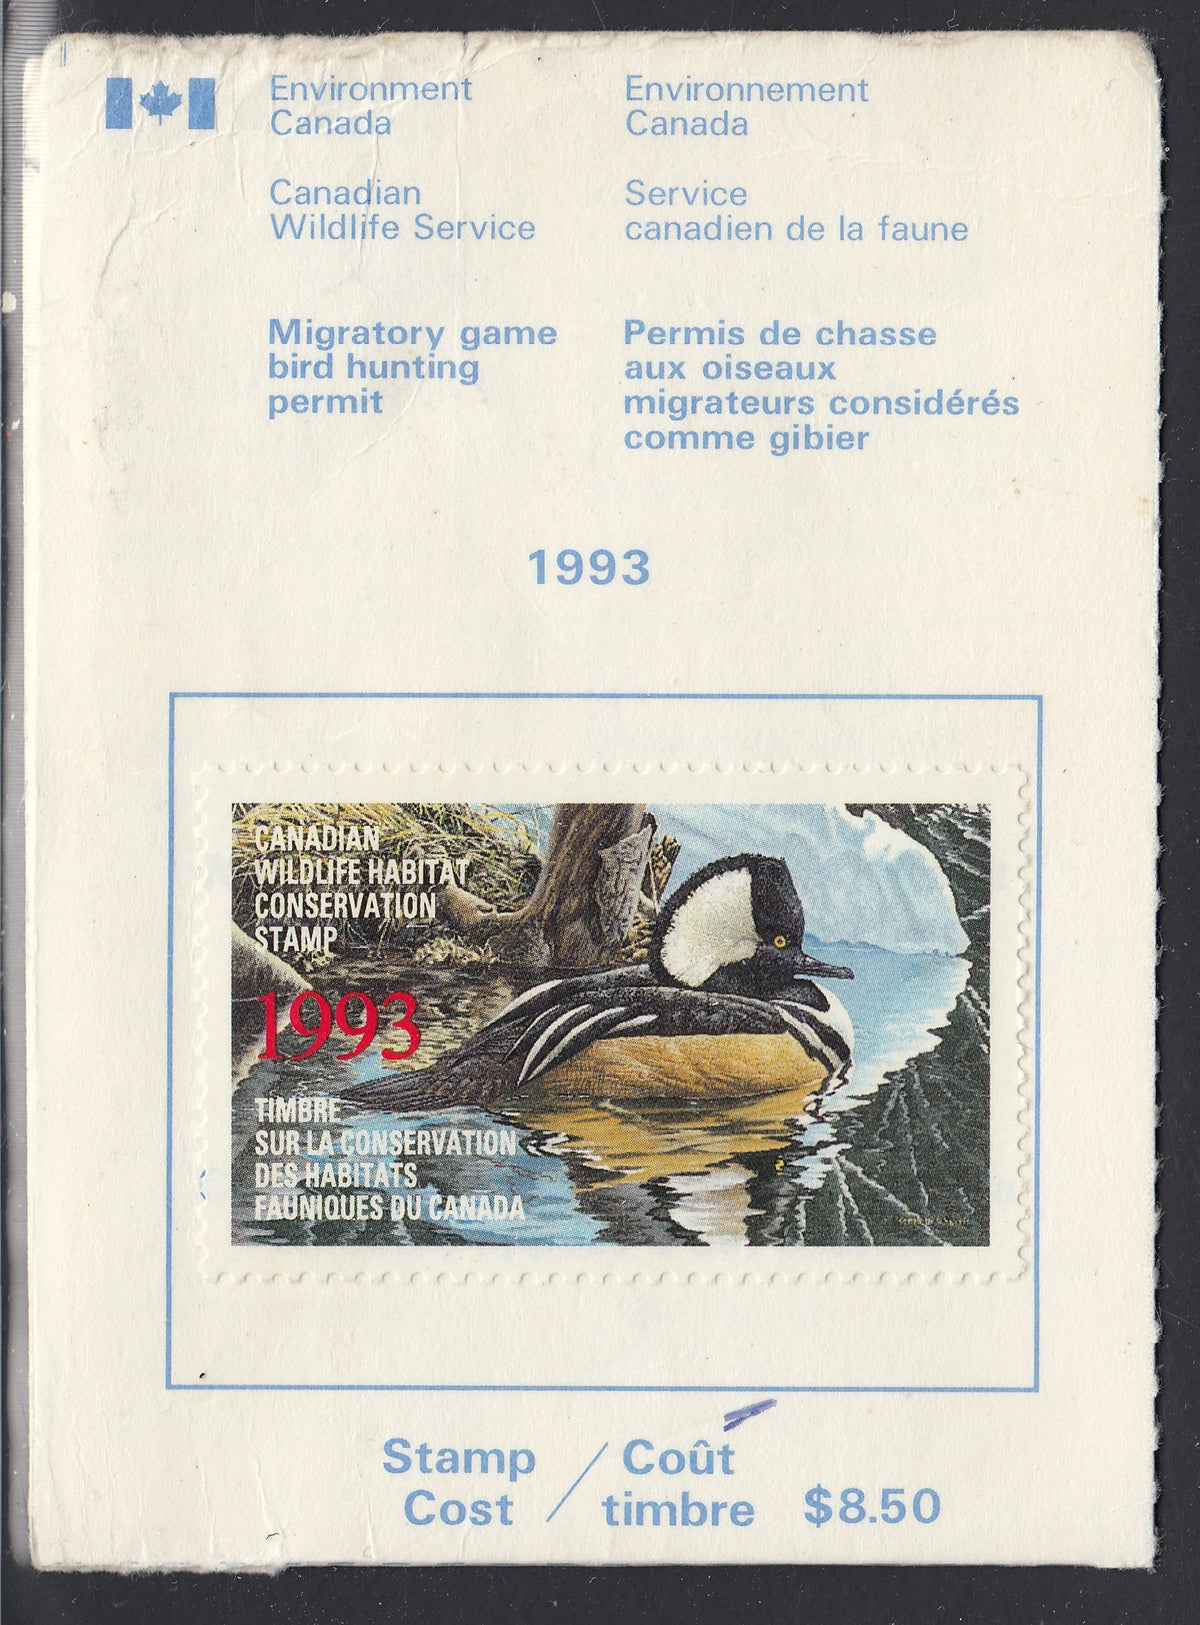 0009FW2105 - FWH9a - Used on License